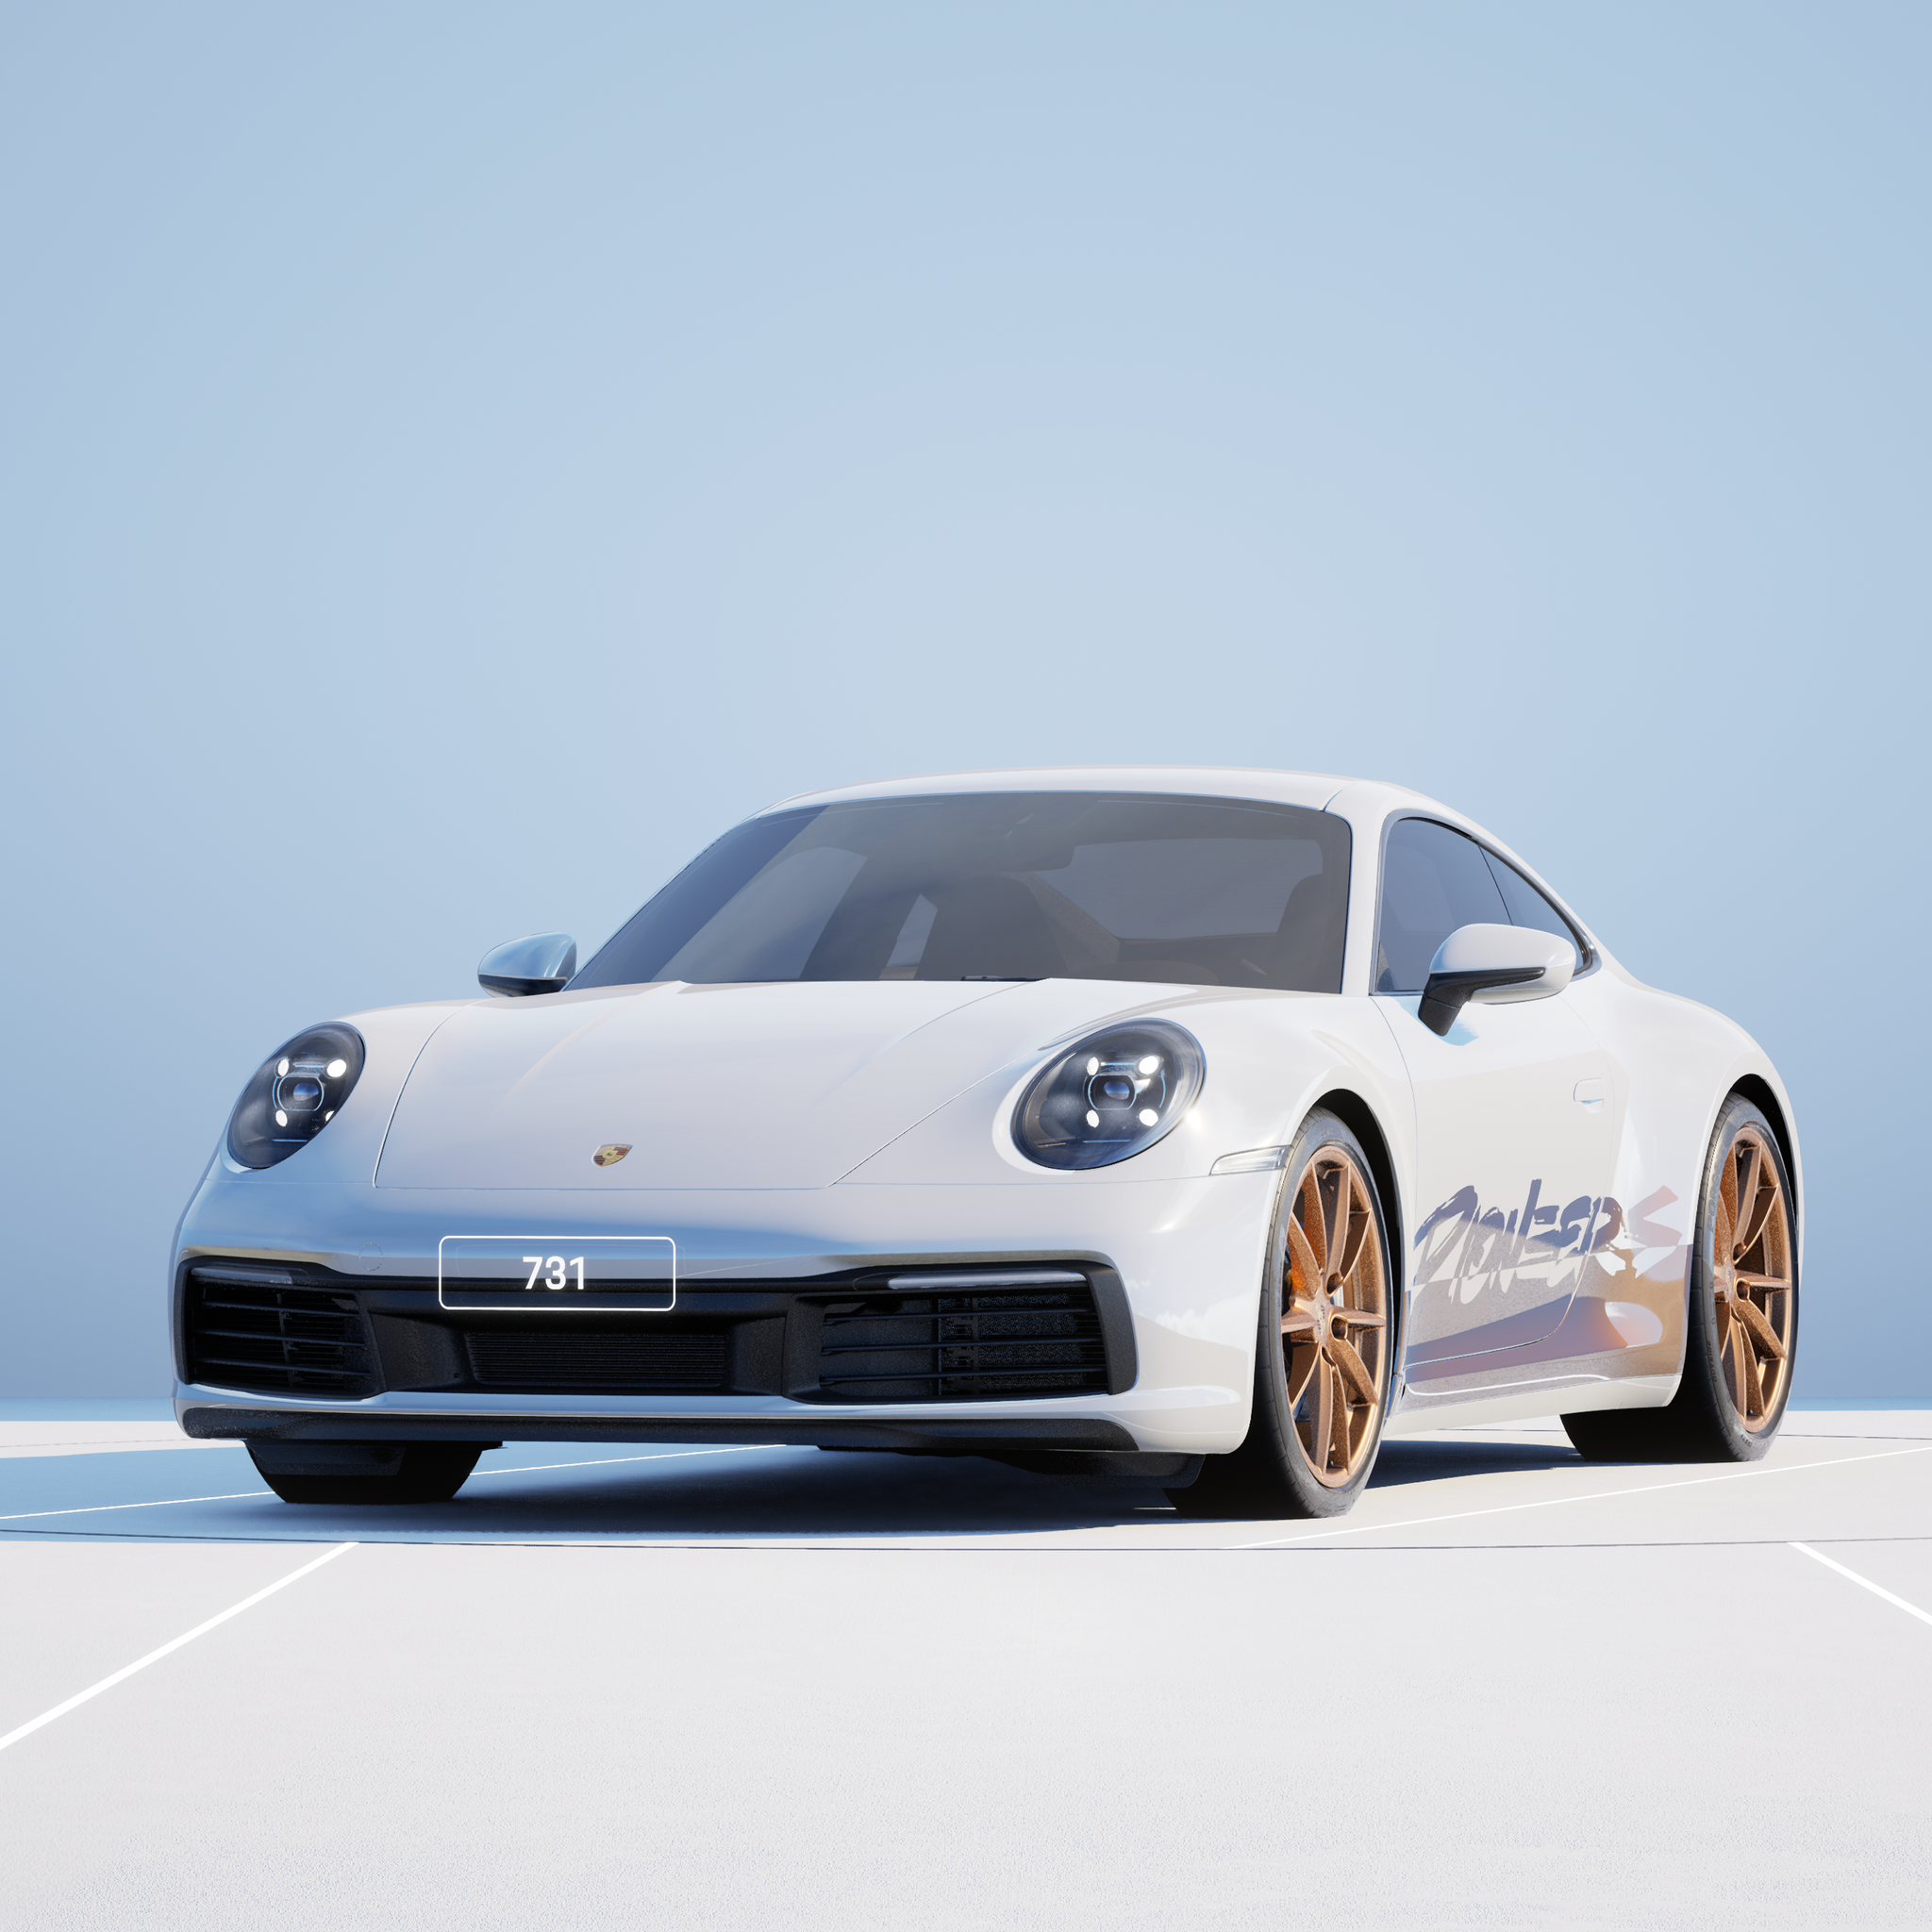 The PORSCHΞ 911 731 image in phase